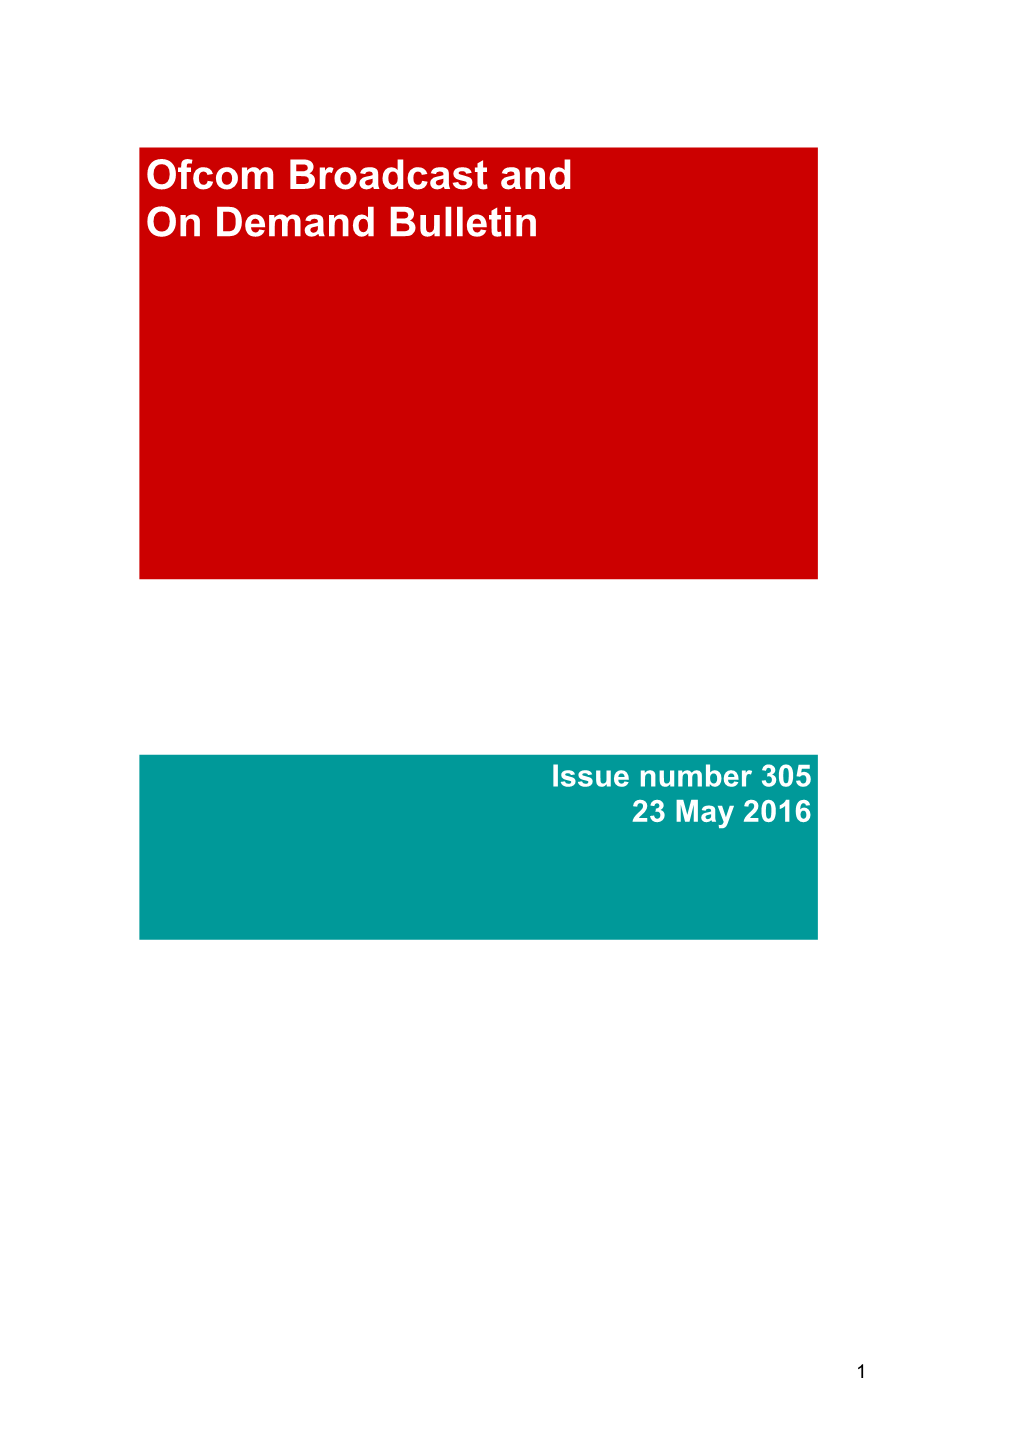 Broadcast and on Demand Bulletin Issue Number 305 23/05/16